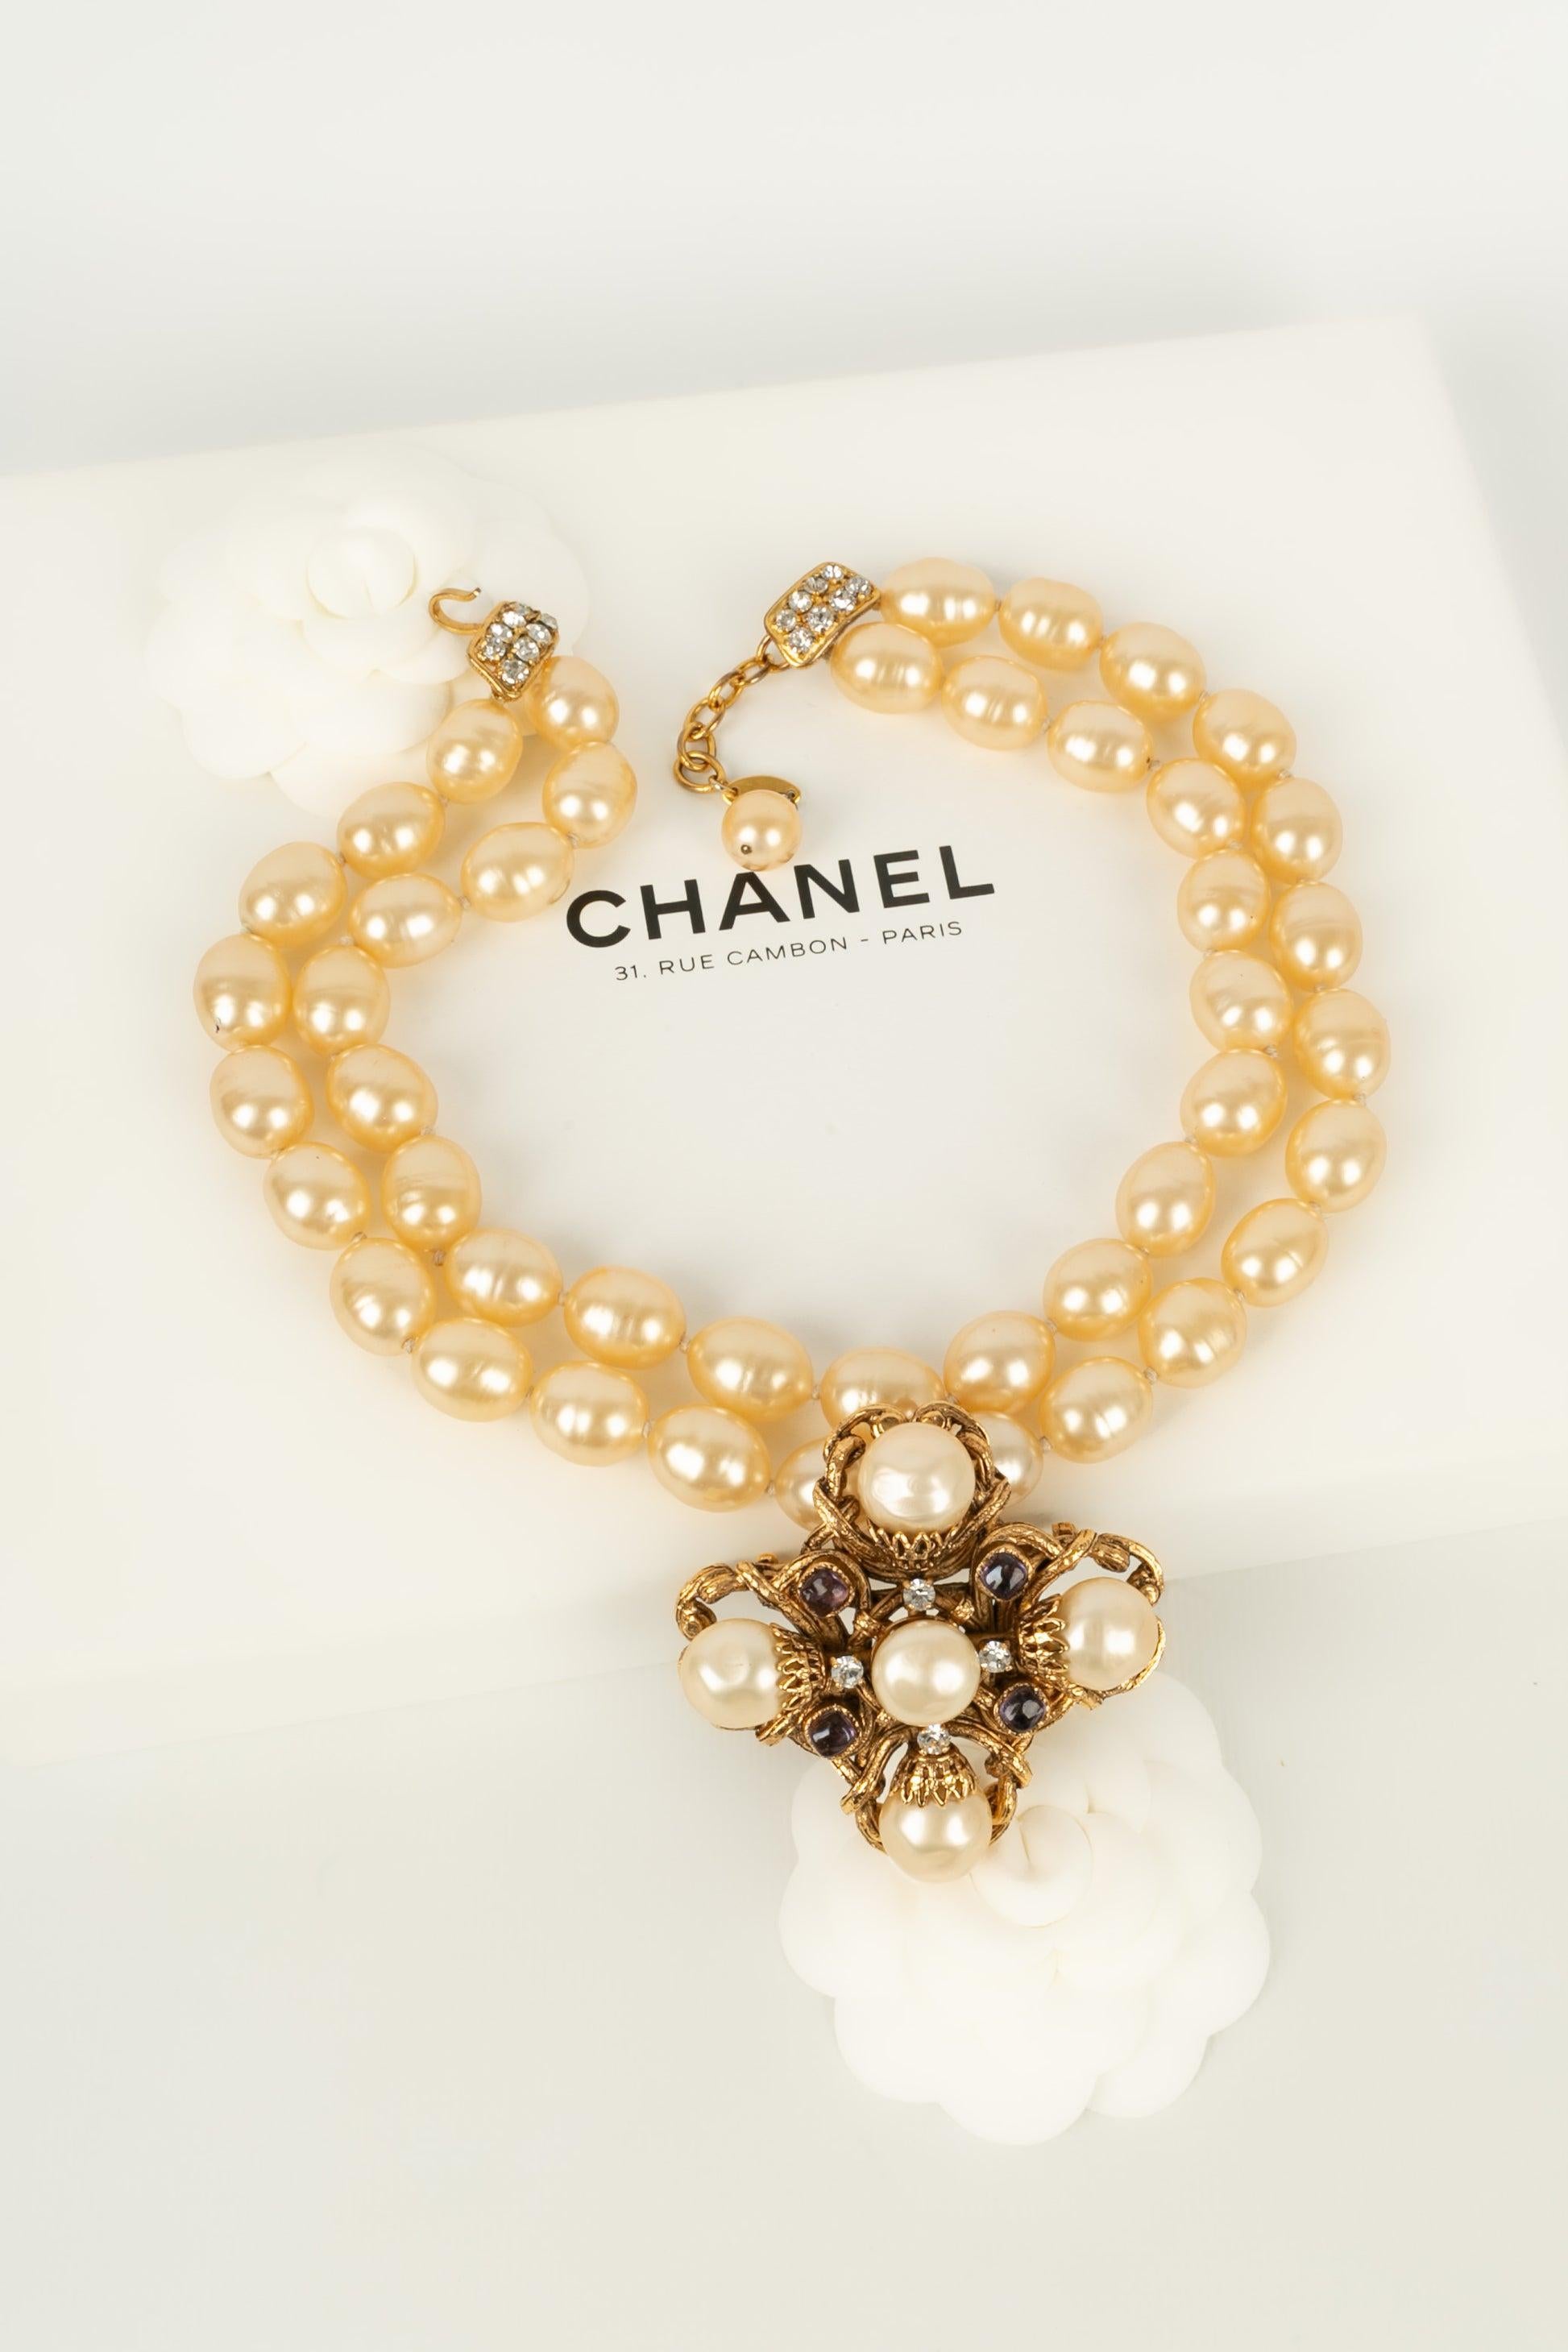 Chanel Short Two-Row Necklace with Pearly Beads For Sale 8